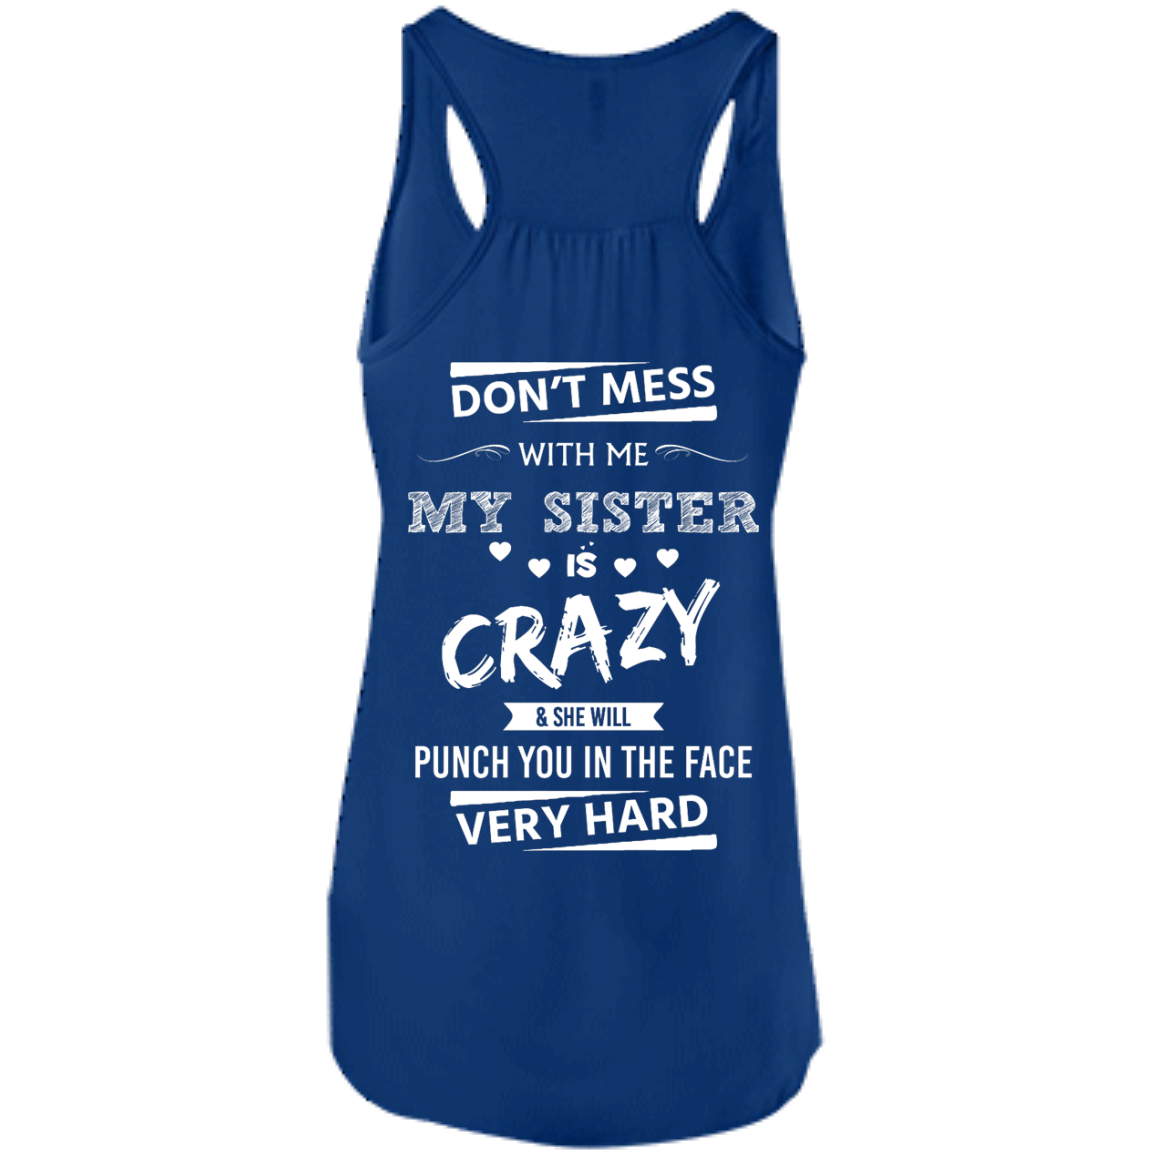 Funny Shirts Don T Mess With Me My Sister Is Crazy And She Will Punch You In The Face Very Hard